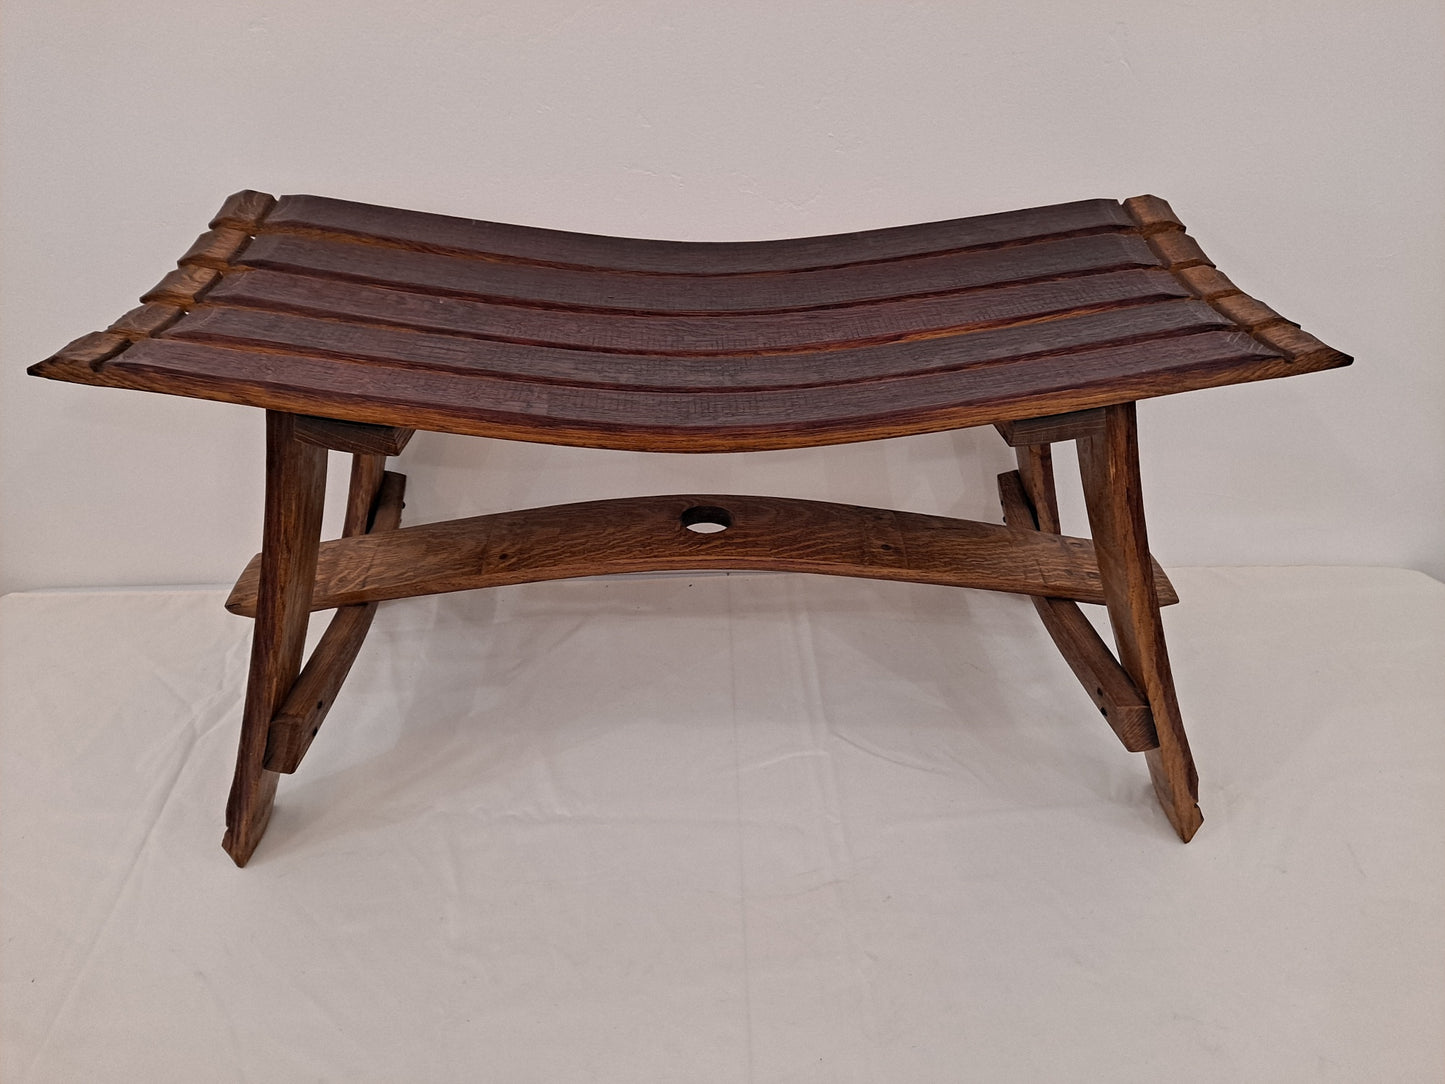 Bench from Wine Barrel Staves